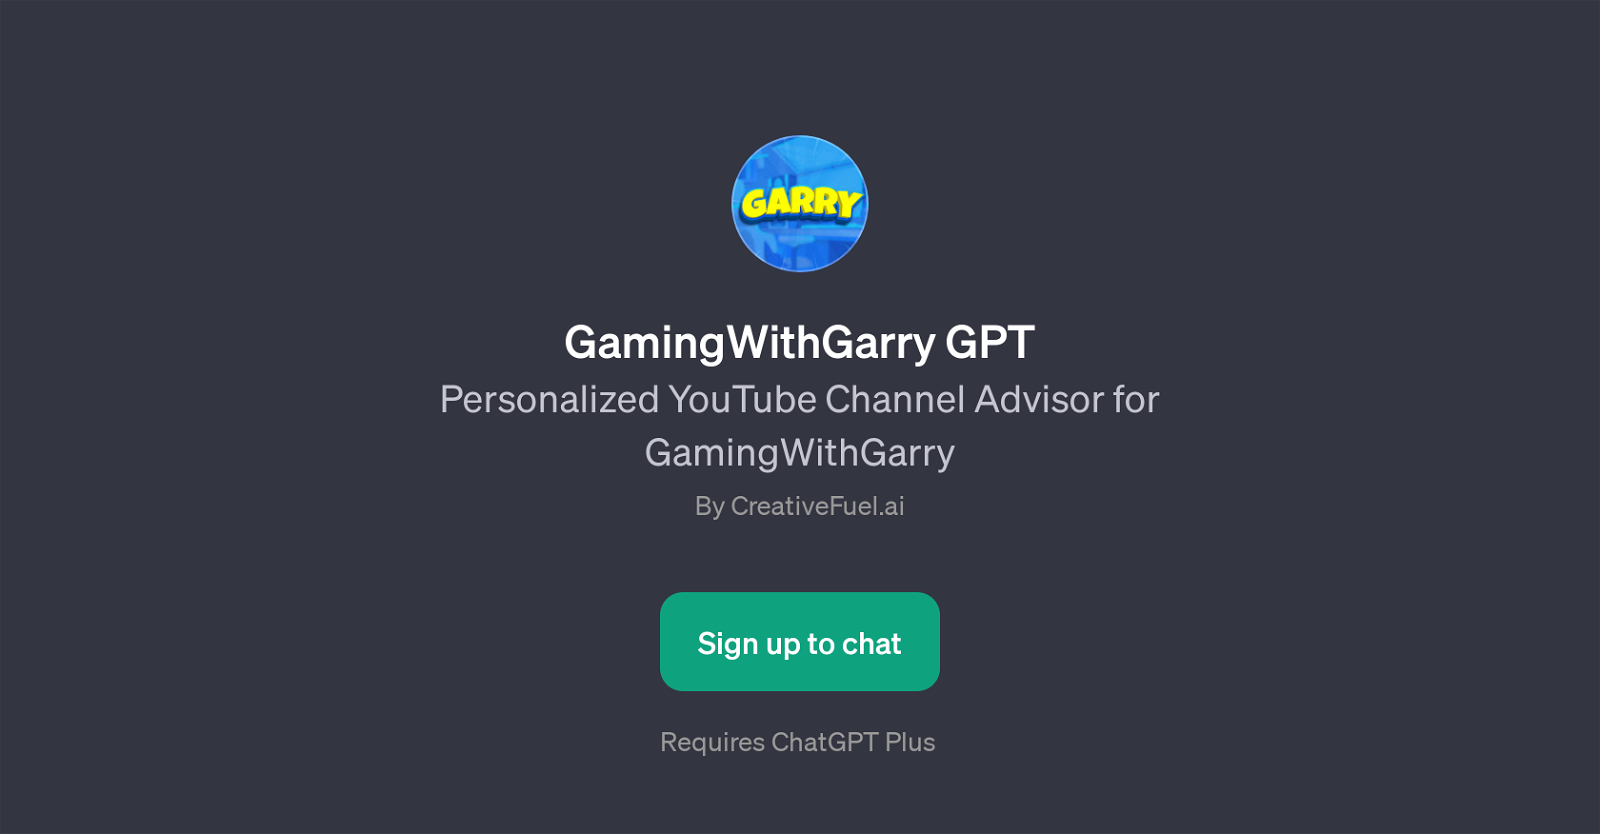 GamingWithGarry GPT website